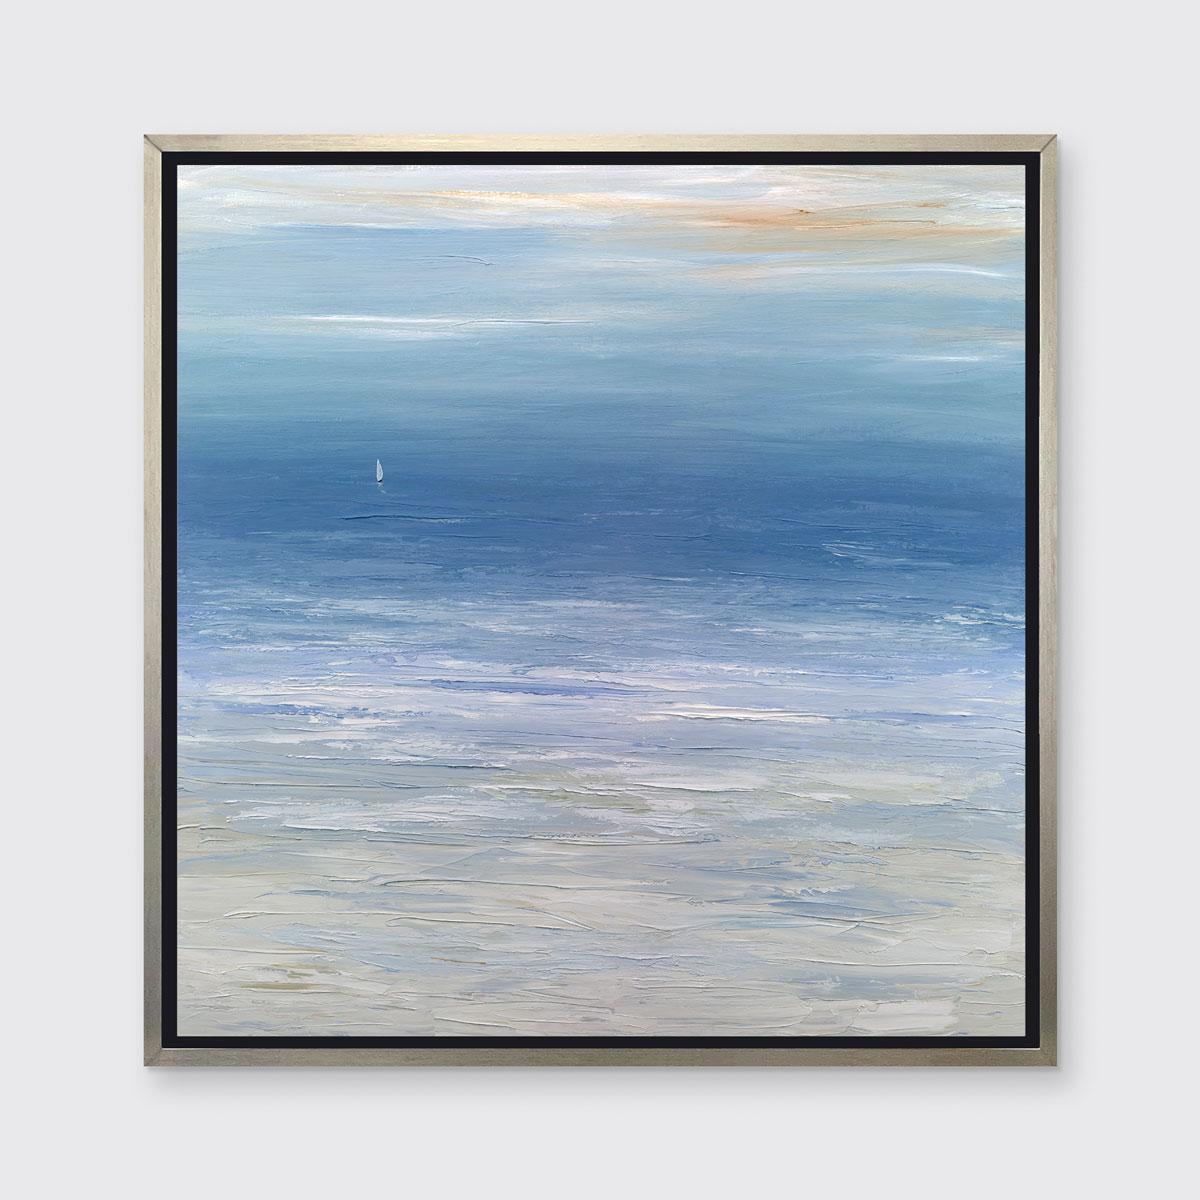 S. Cora Aldo Landscape Print - "Calm Waters II, " Framed Limited Edition Giclee Print, 53" x 53"